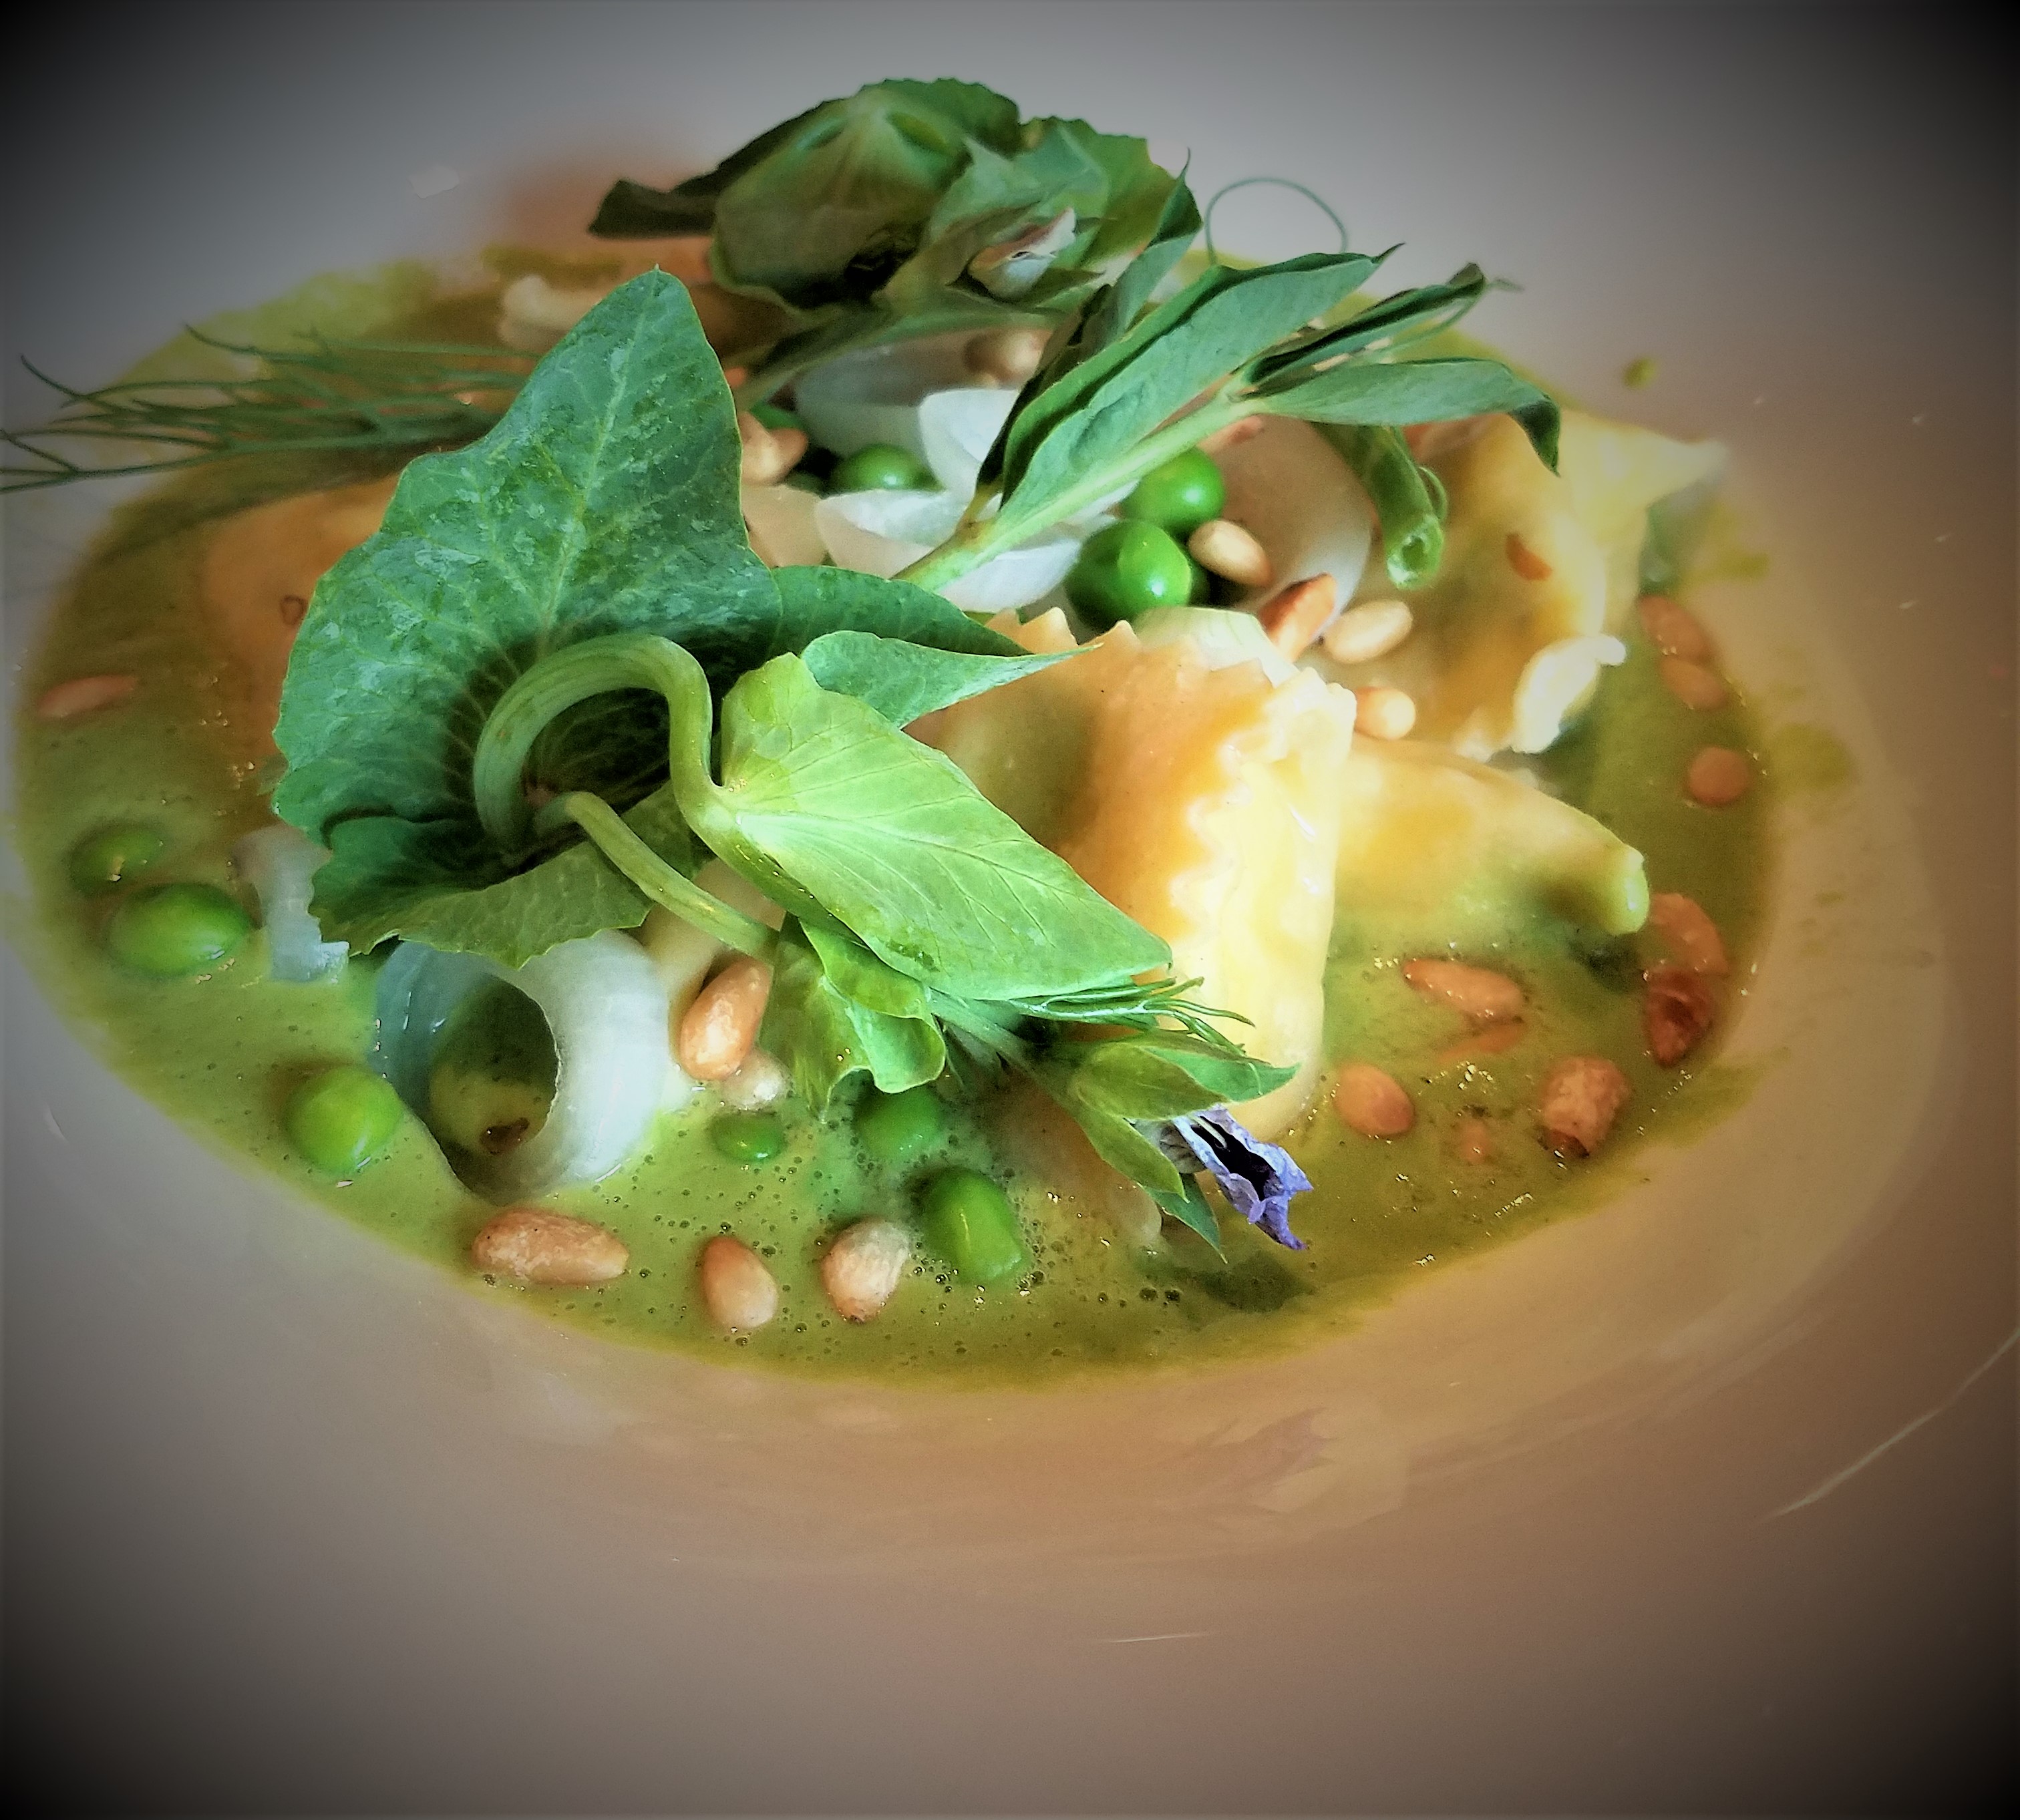 A dish of ravioli, beans, sprouts, greens, onions and a green broth in a white dish.